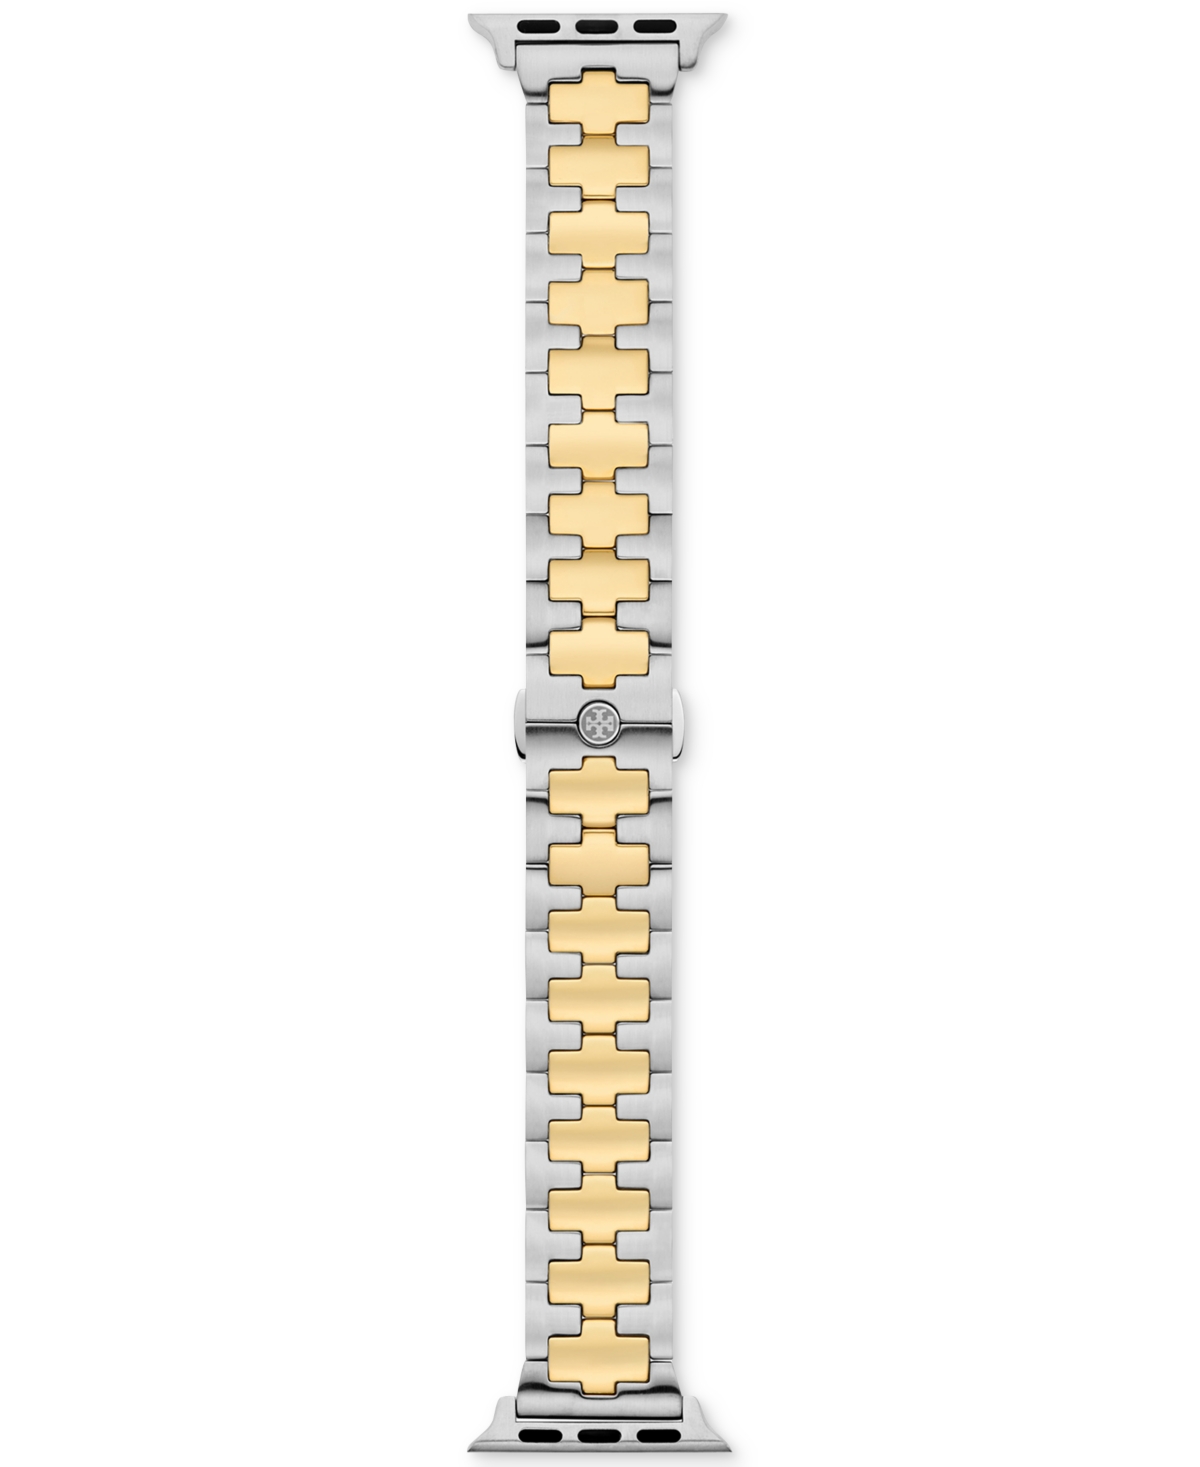 Tory Burch Reva Two-tone Stainless Steel Bracelet For Apple Watch 38mm/40mm